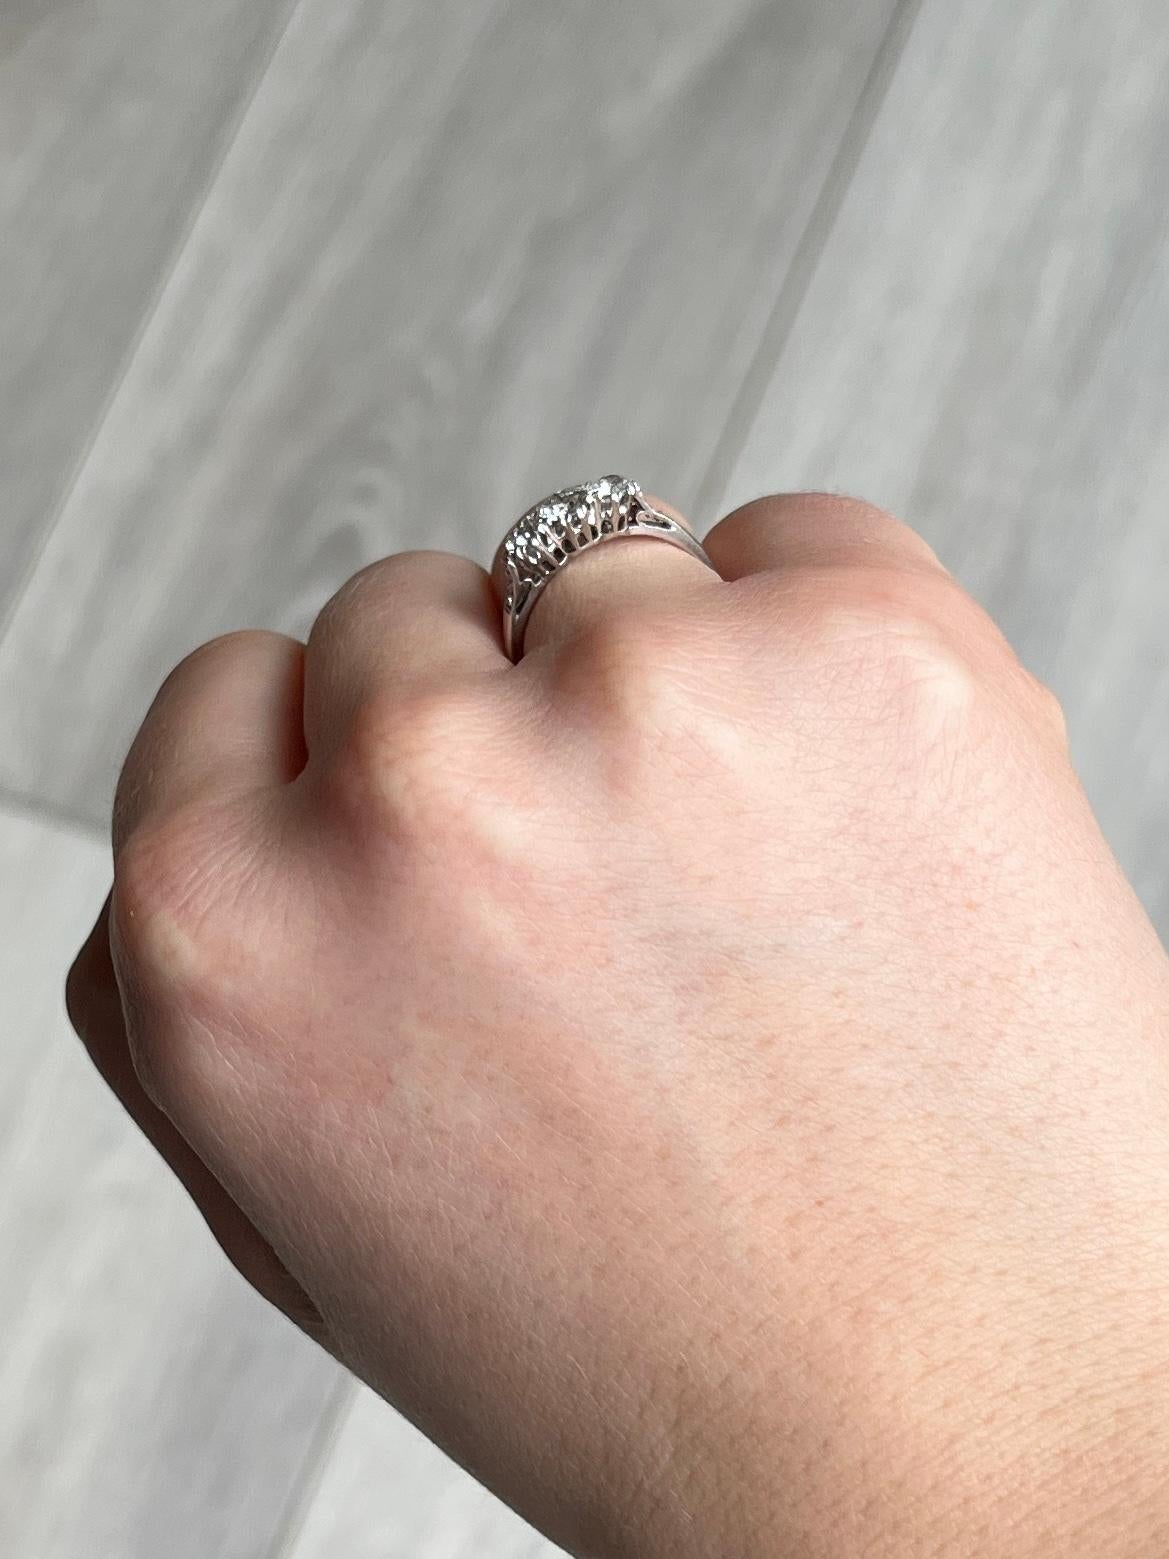 This three stone ring holds a slightly larger central diamond and two smaller ones either side. Diamond total is 85pts. Modelled in platinum.

Ring Size: M 1/2 or 6 1/2 
Height off finger: 4.5mm

Weight: 2.6g